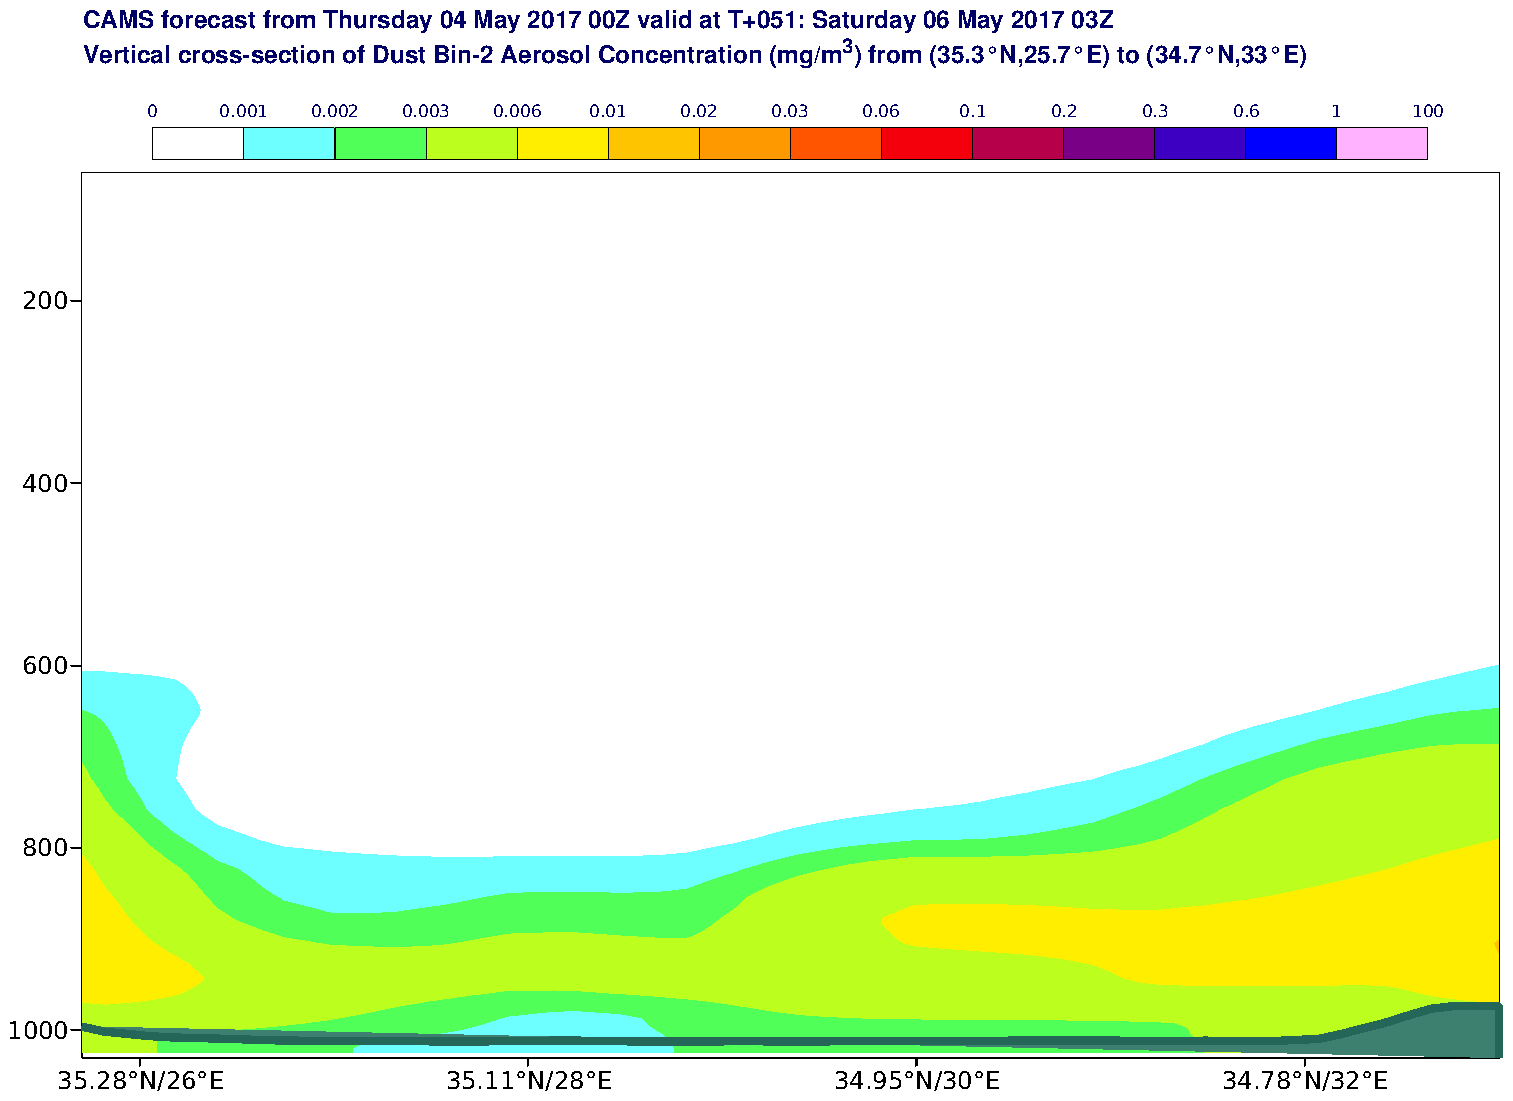 Vertical cross-section of Dust Bin-2 Aerosol Concentration (mg/m3) valid at T51 - 2017-05-06 03:00